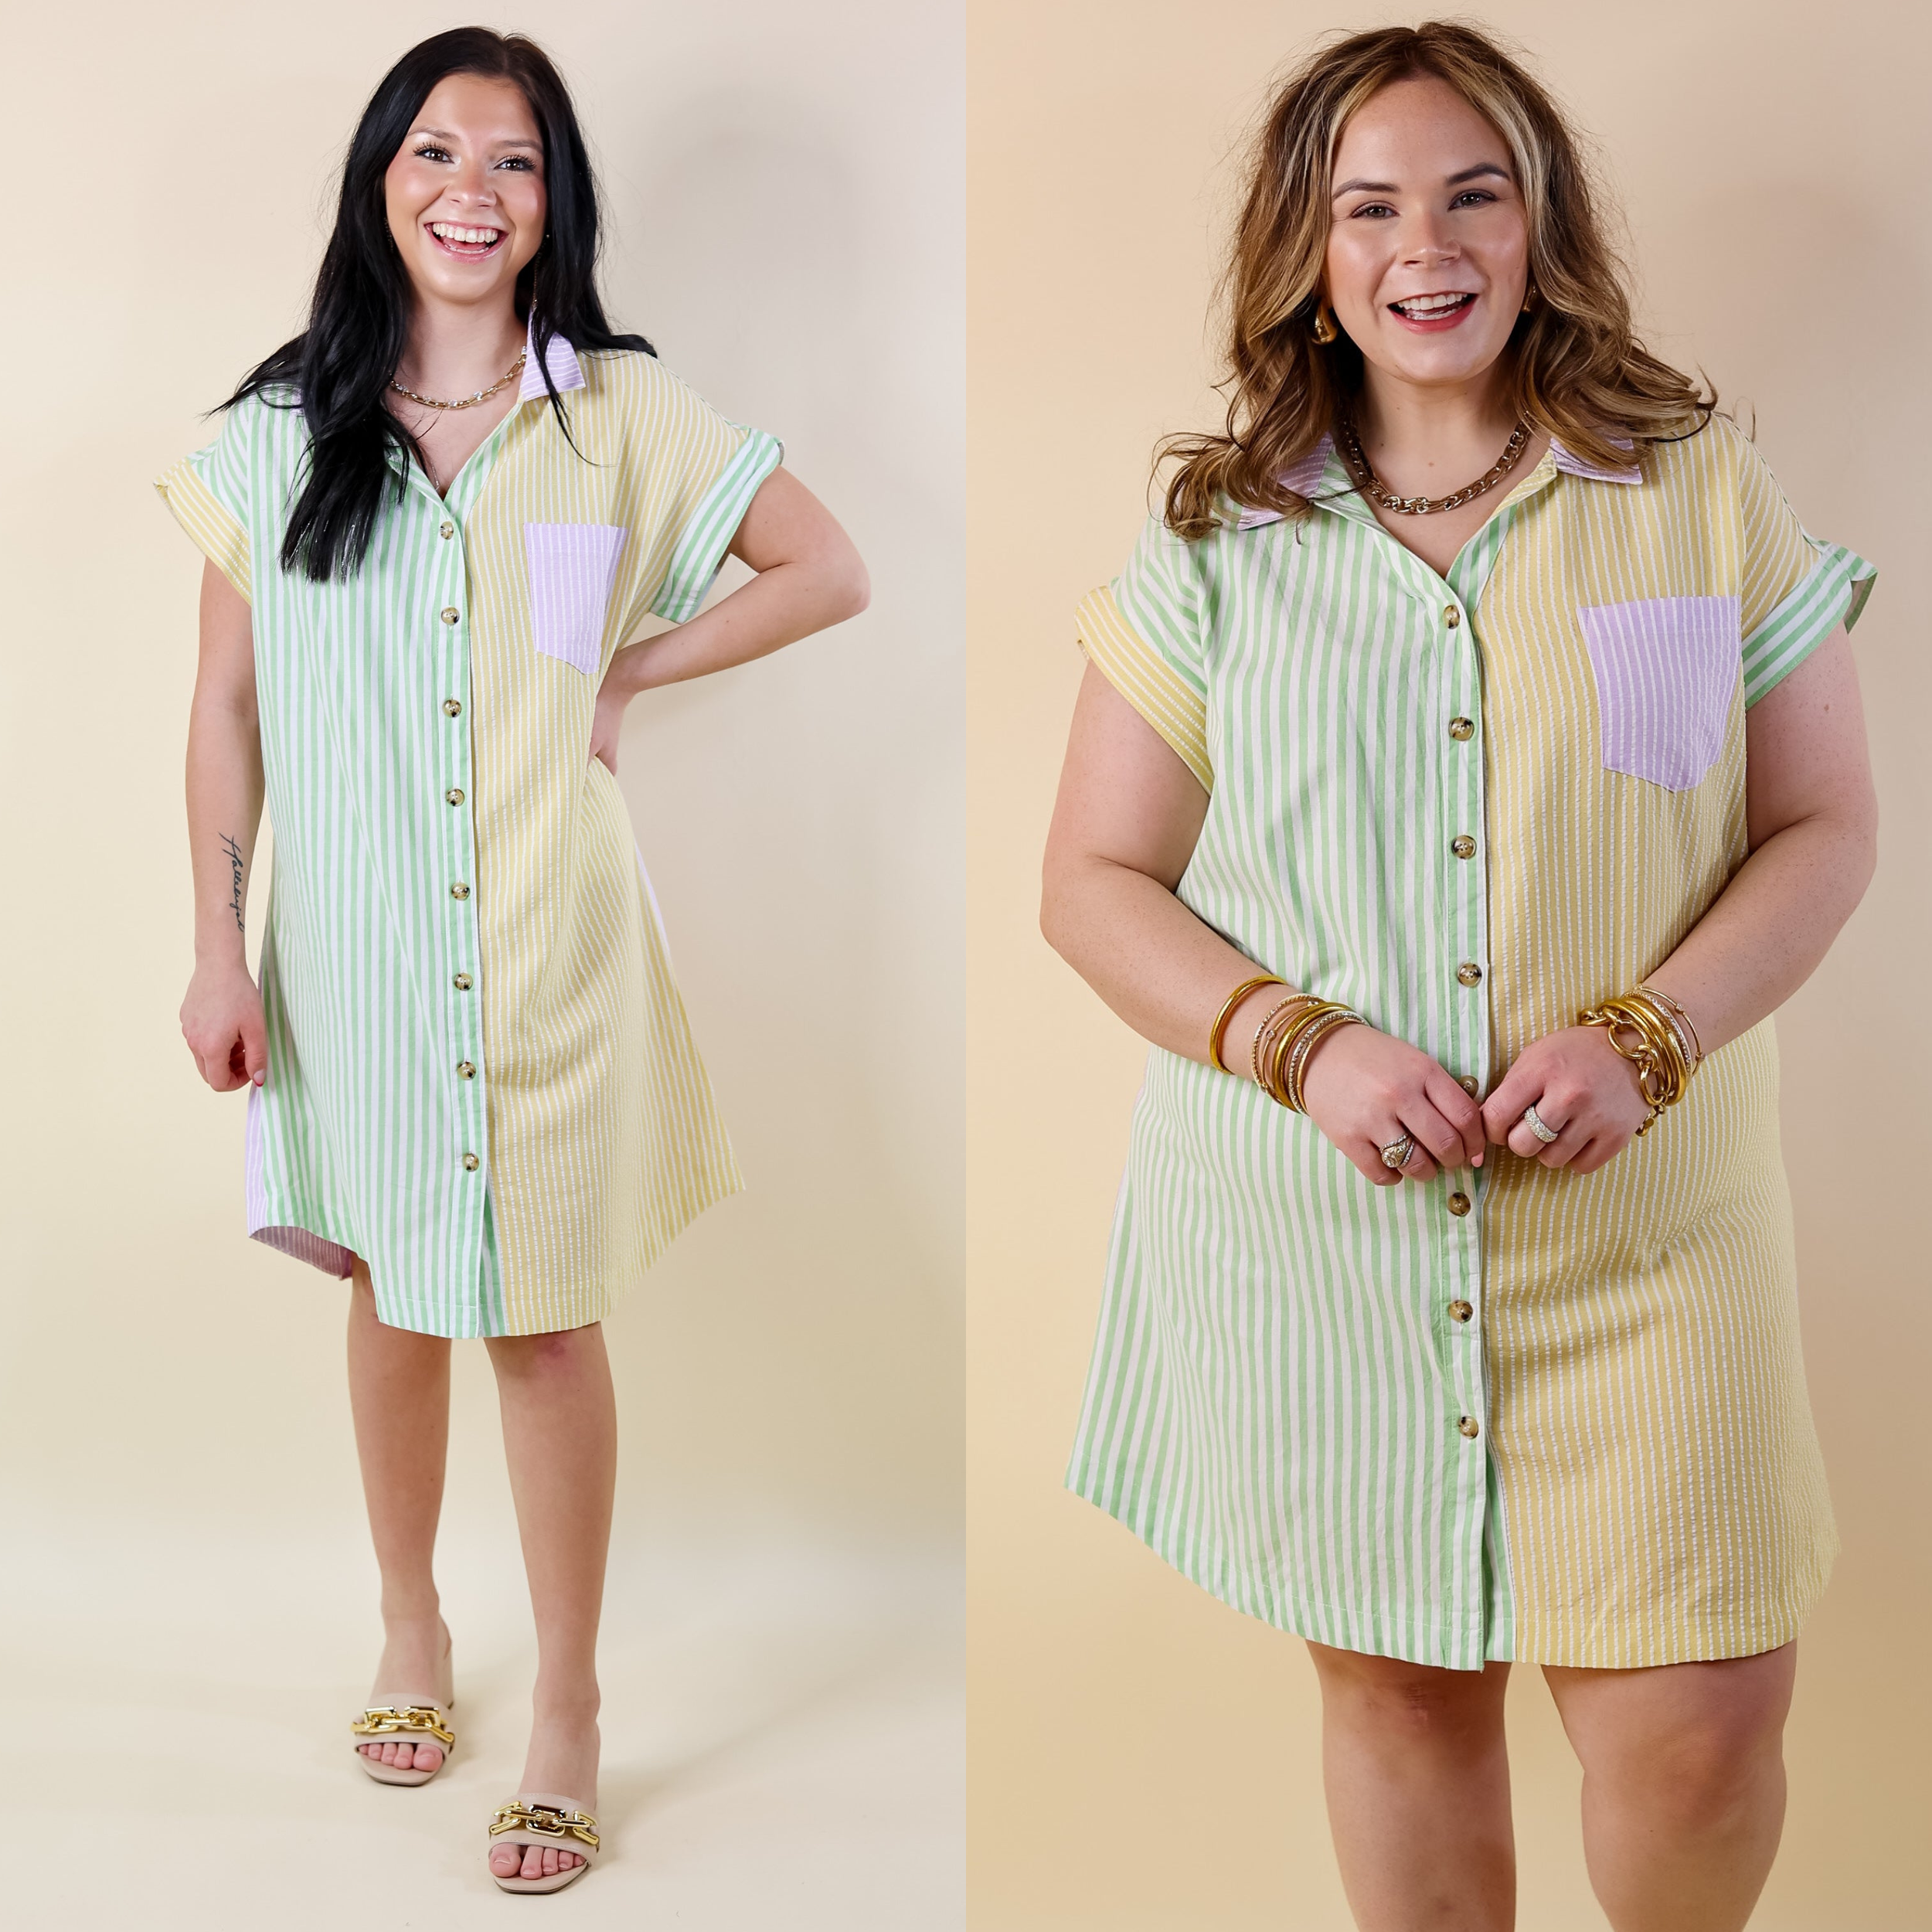 Seasonal Cruisin' Button Up Pinstripe Dress in Purple and Green - Giddy Up Glamour Boutique